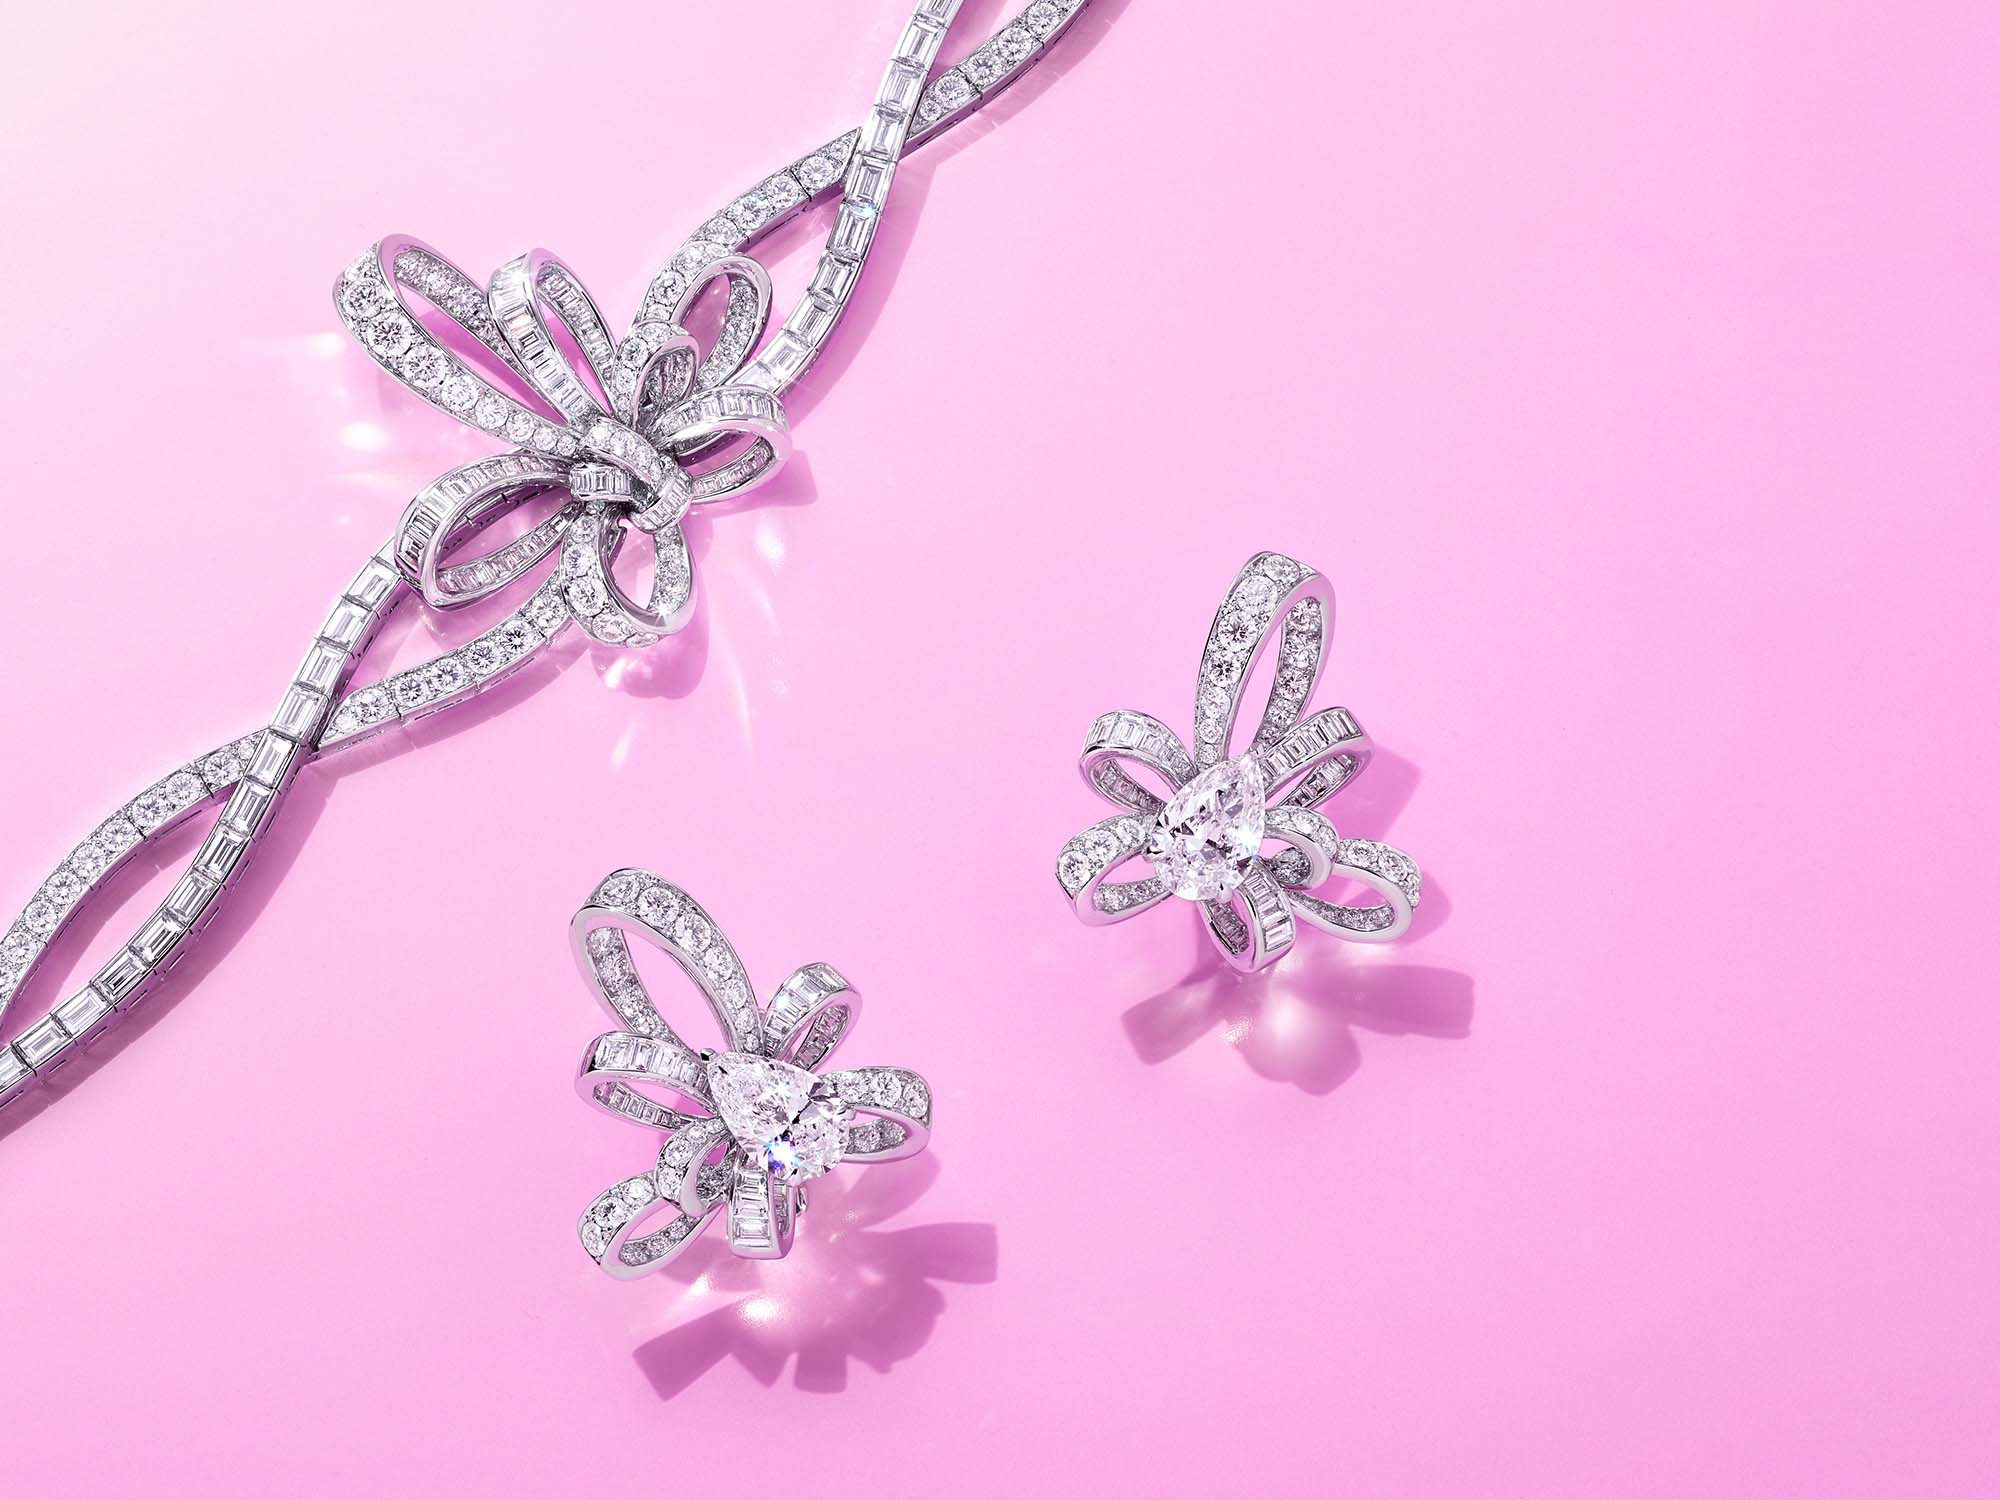 Graff Tilda's Bow jewellery collection diamond earrings and bracelet on a pink background